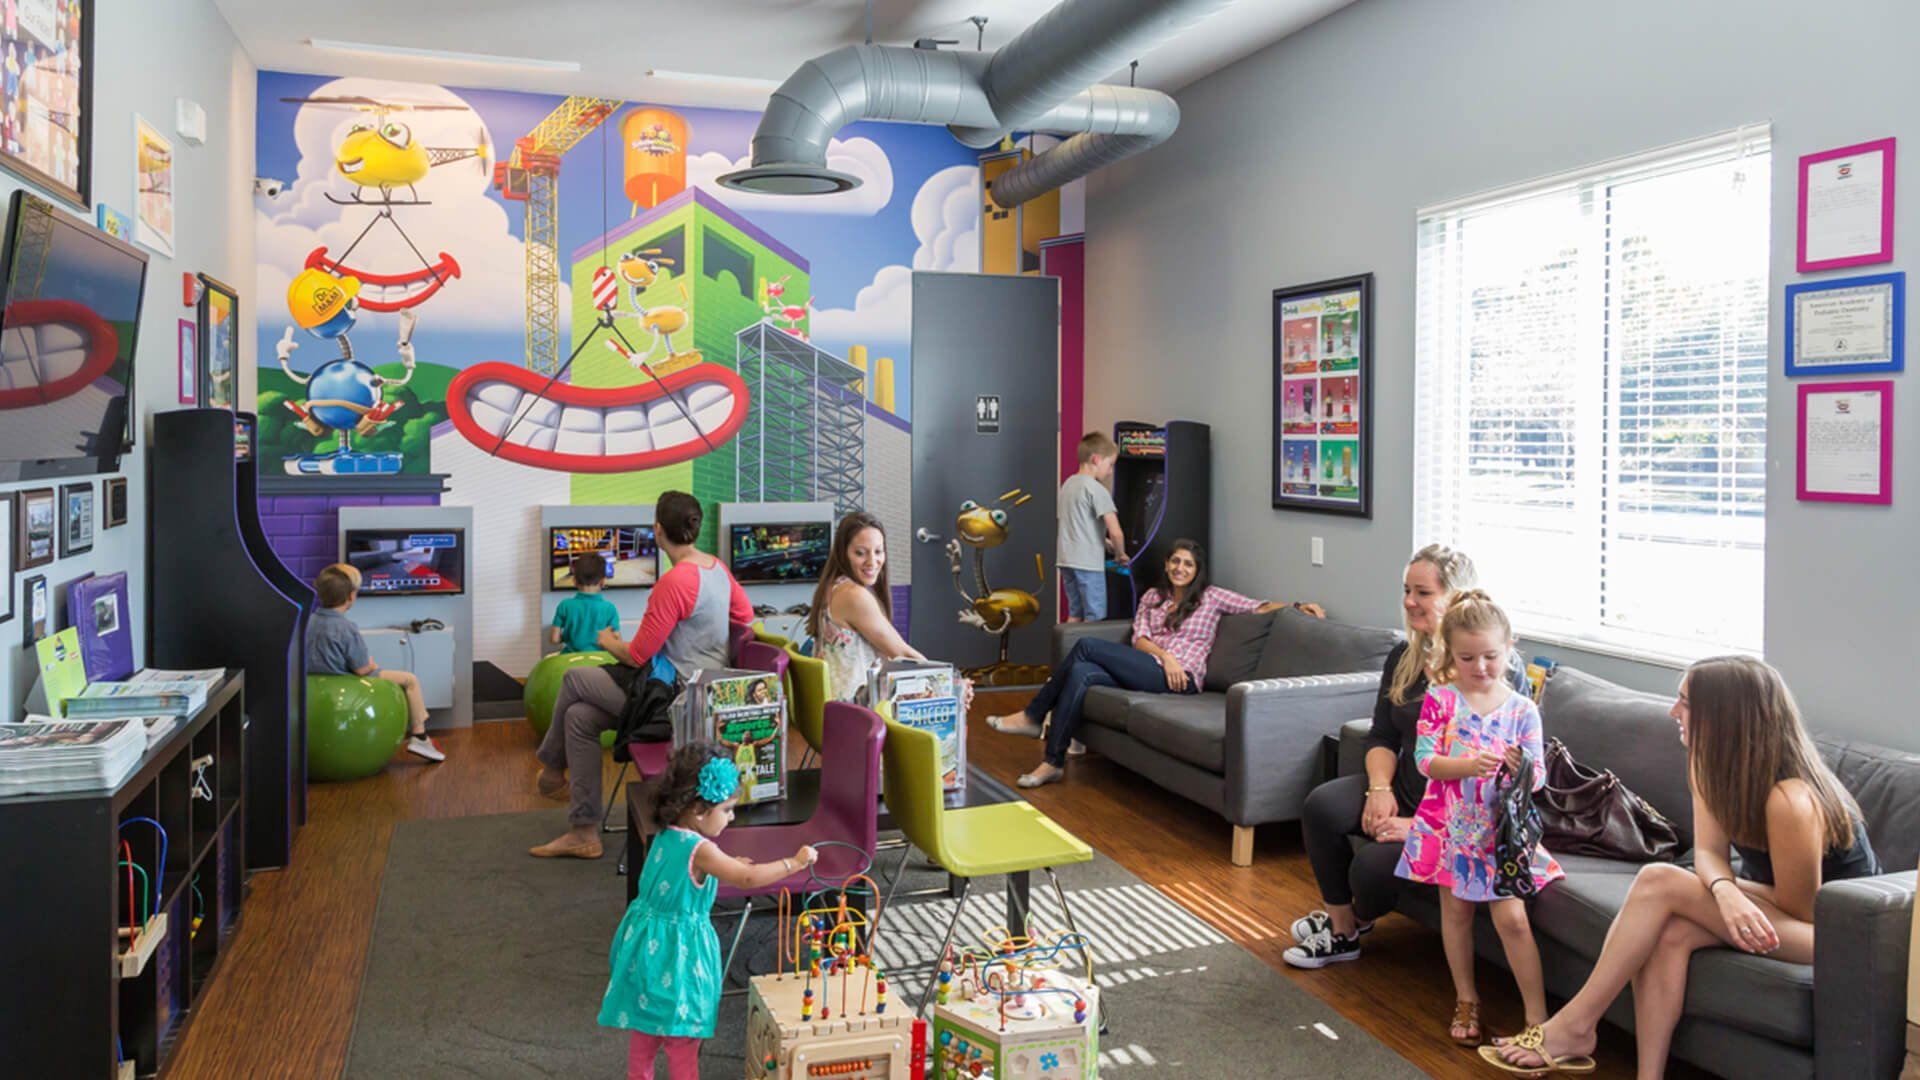 TDN expands with the addition of SmileWorks Kids Dentistry